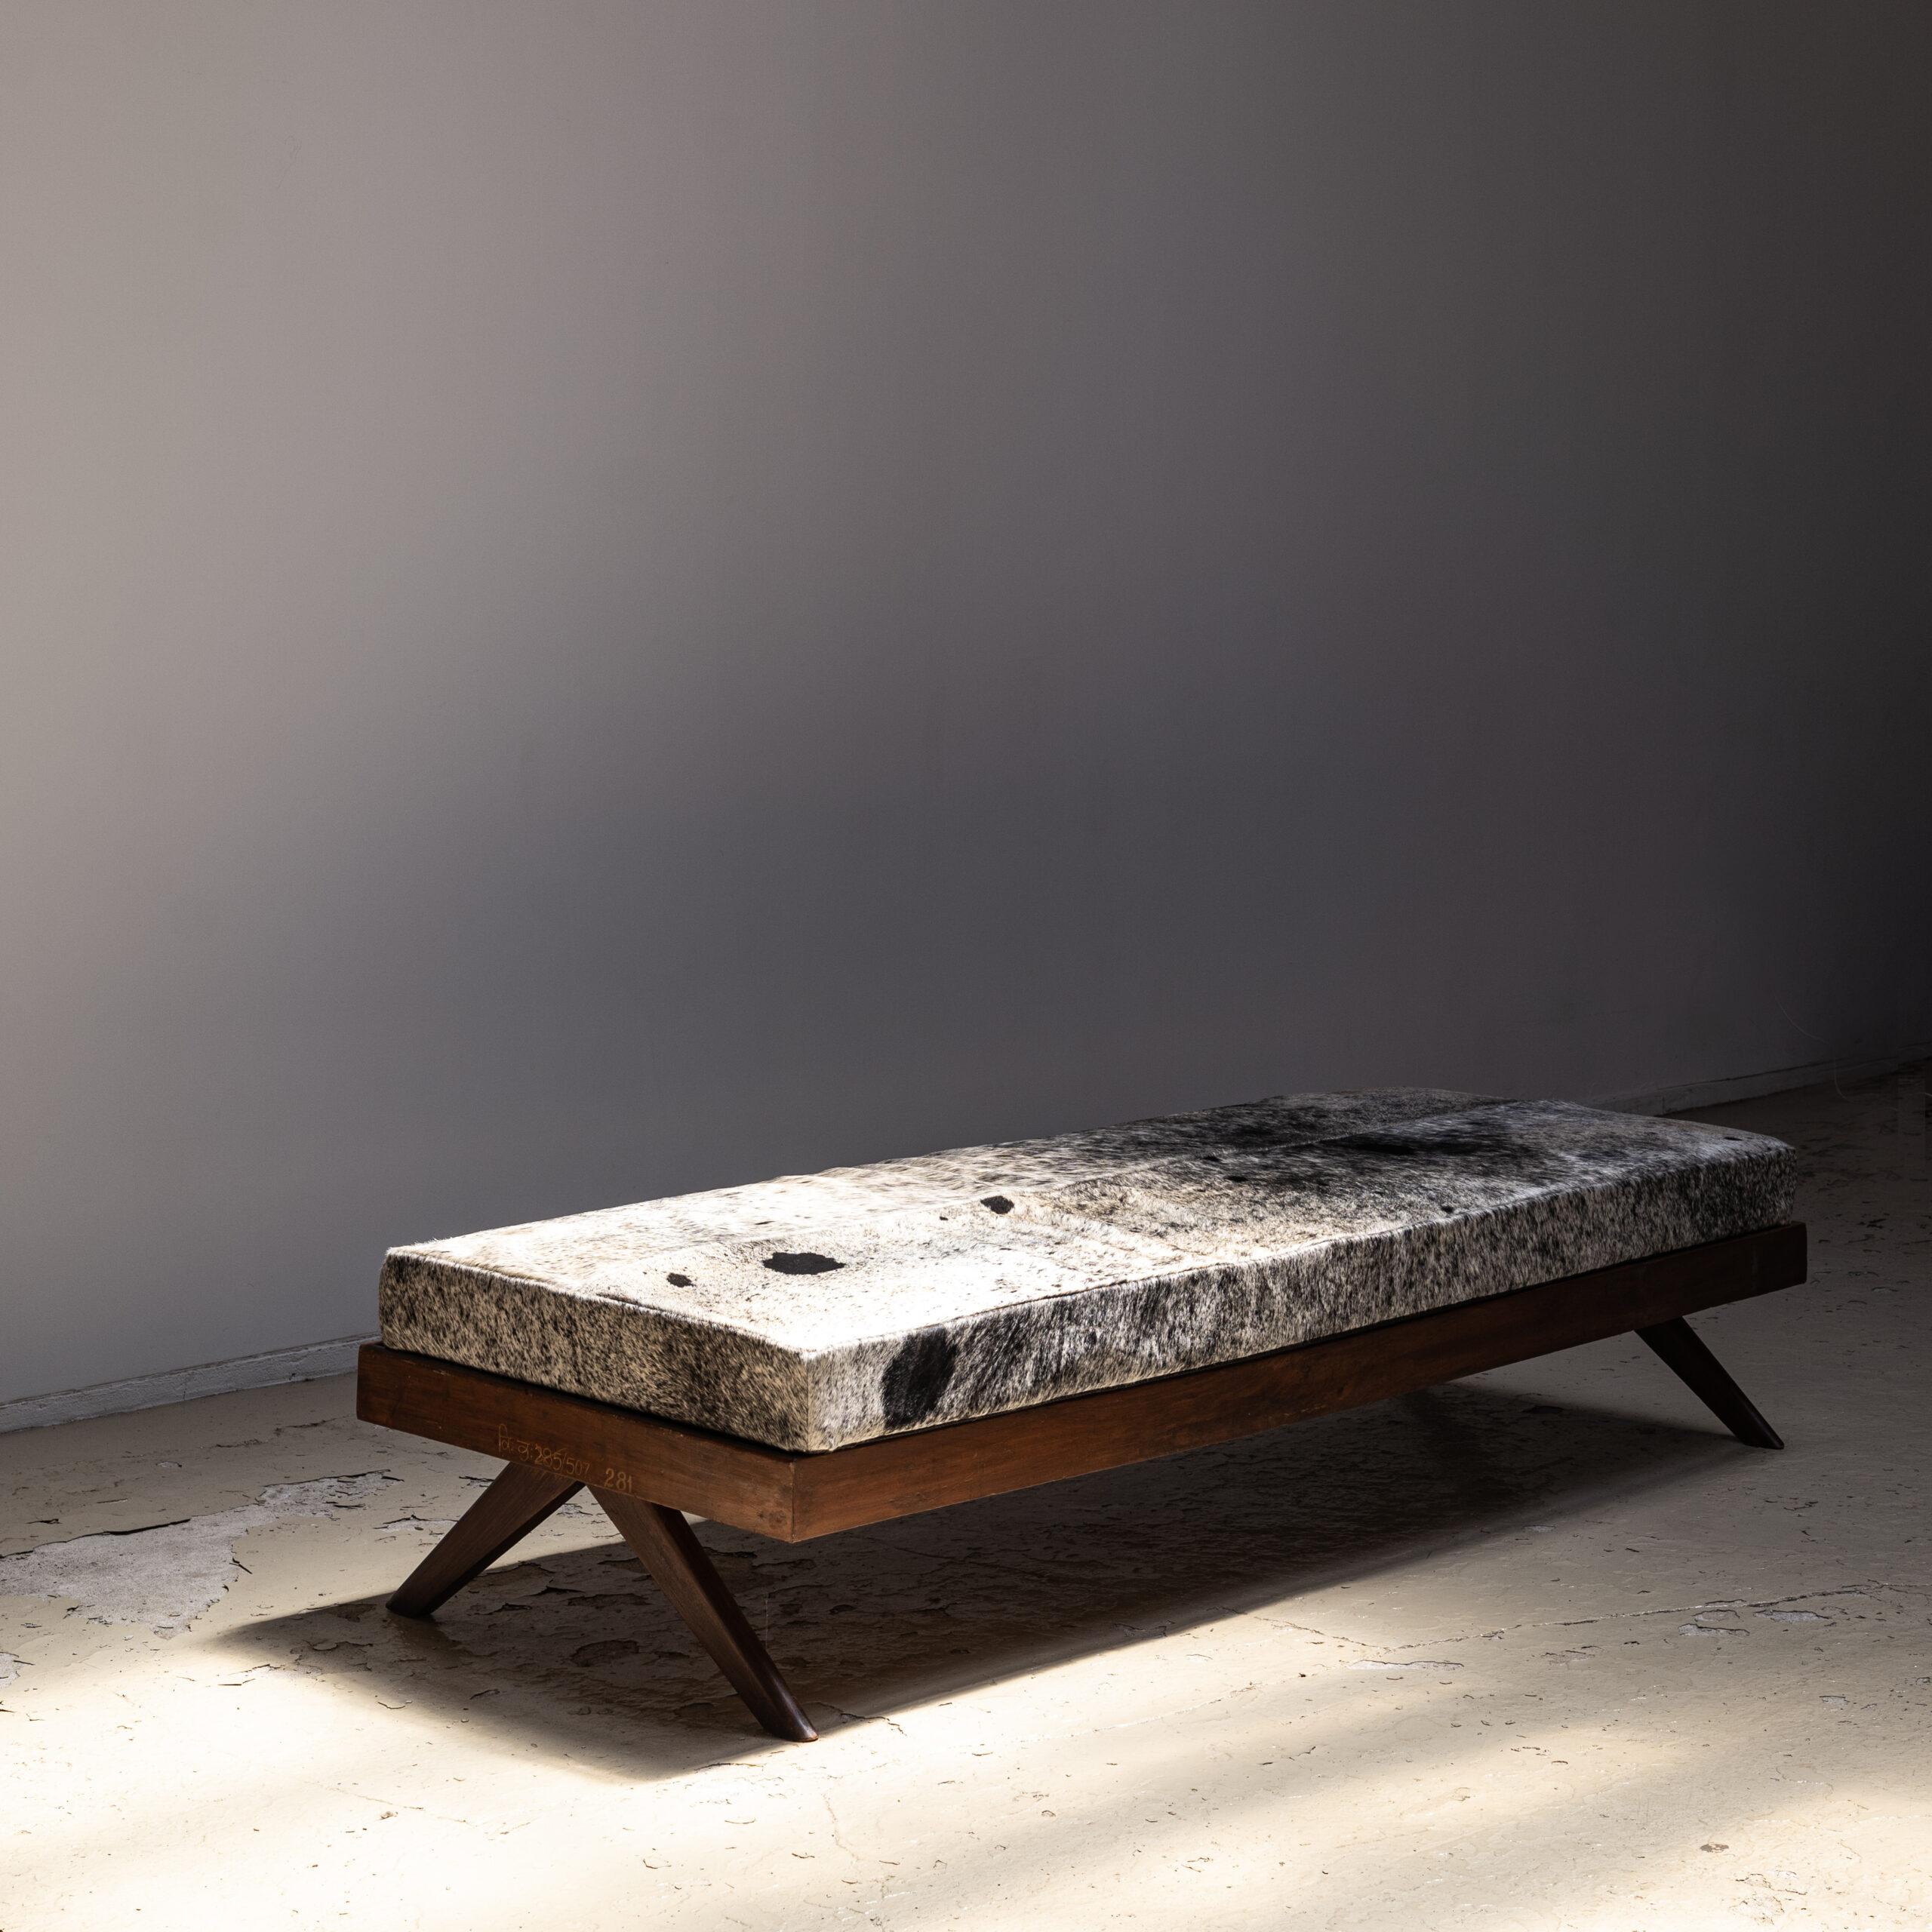 Pierre Jeanneret
Daybed,ピエールジャンヌレ